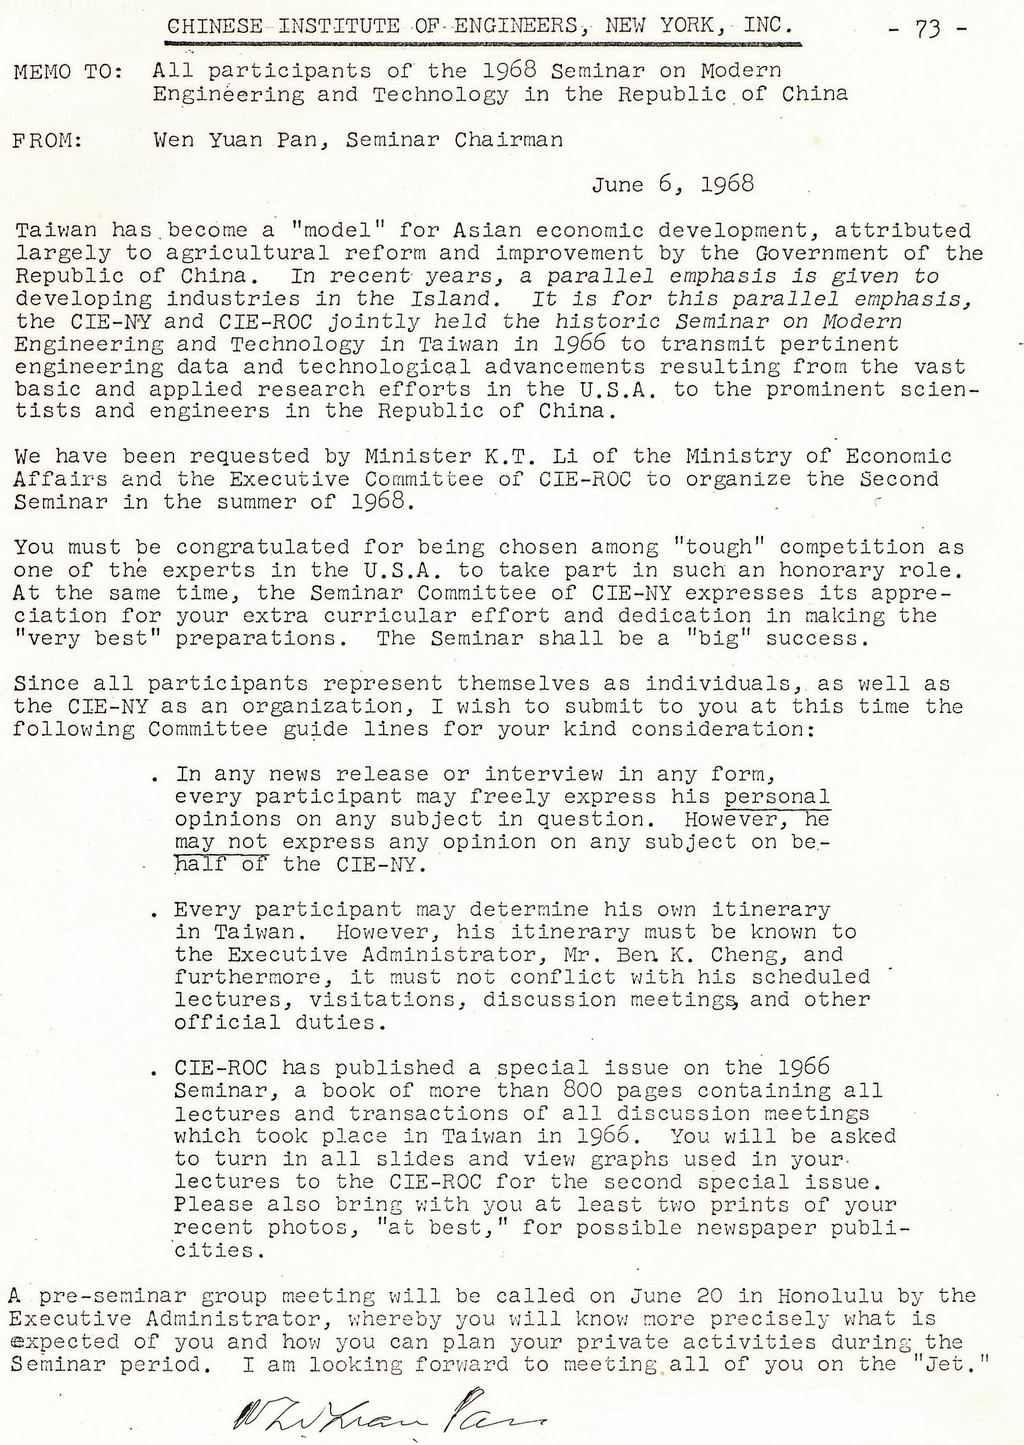 A letter from Pan Wen-Yuan to all the participants of the 1968 Seminar on Modern Engineering and Technology.